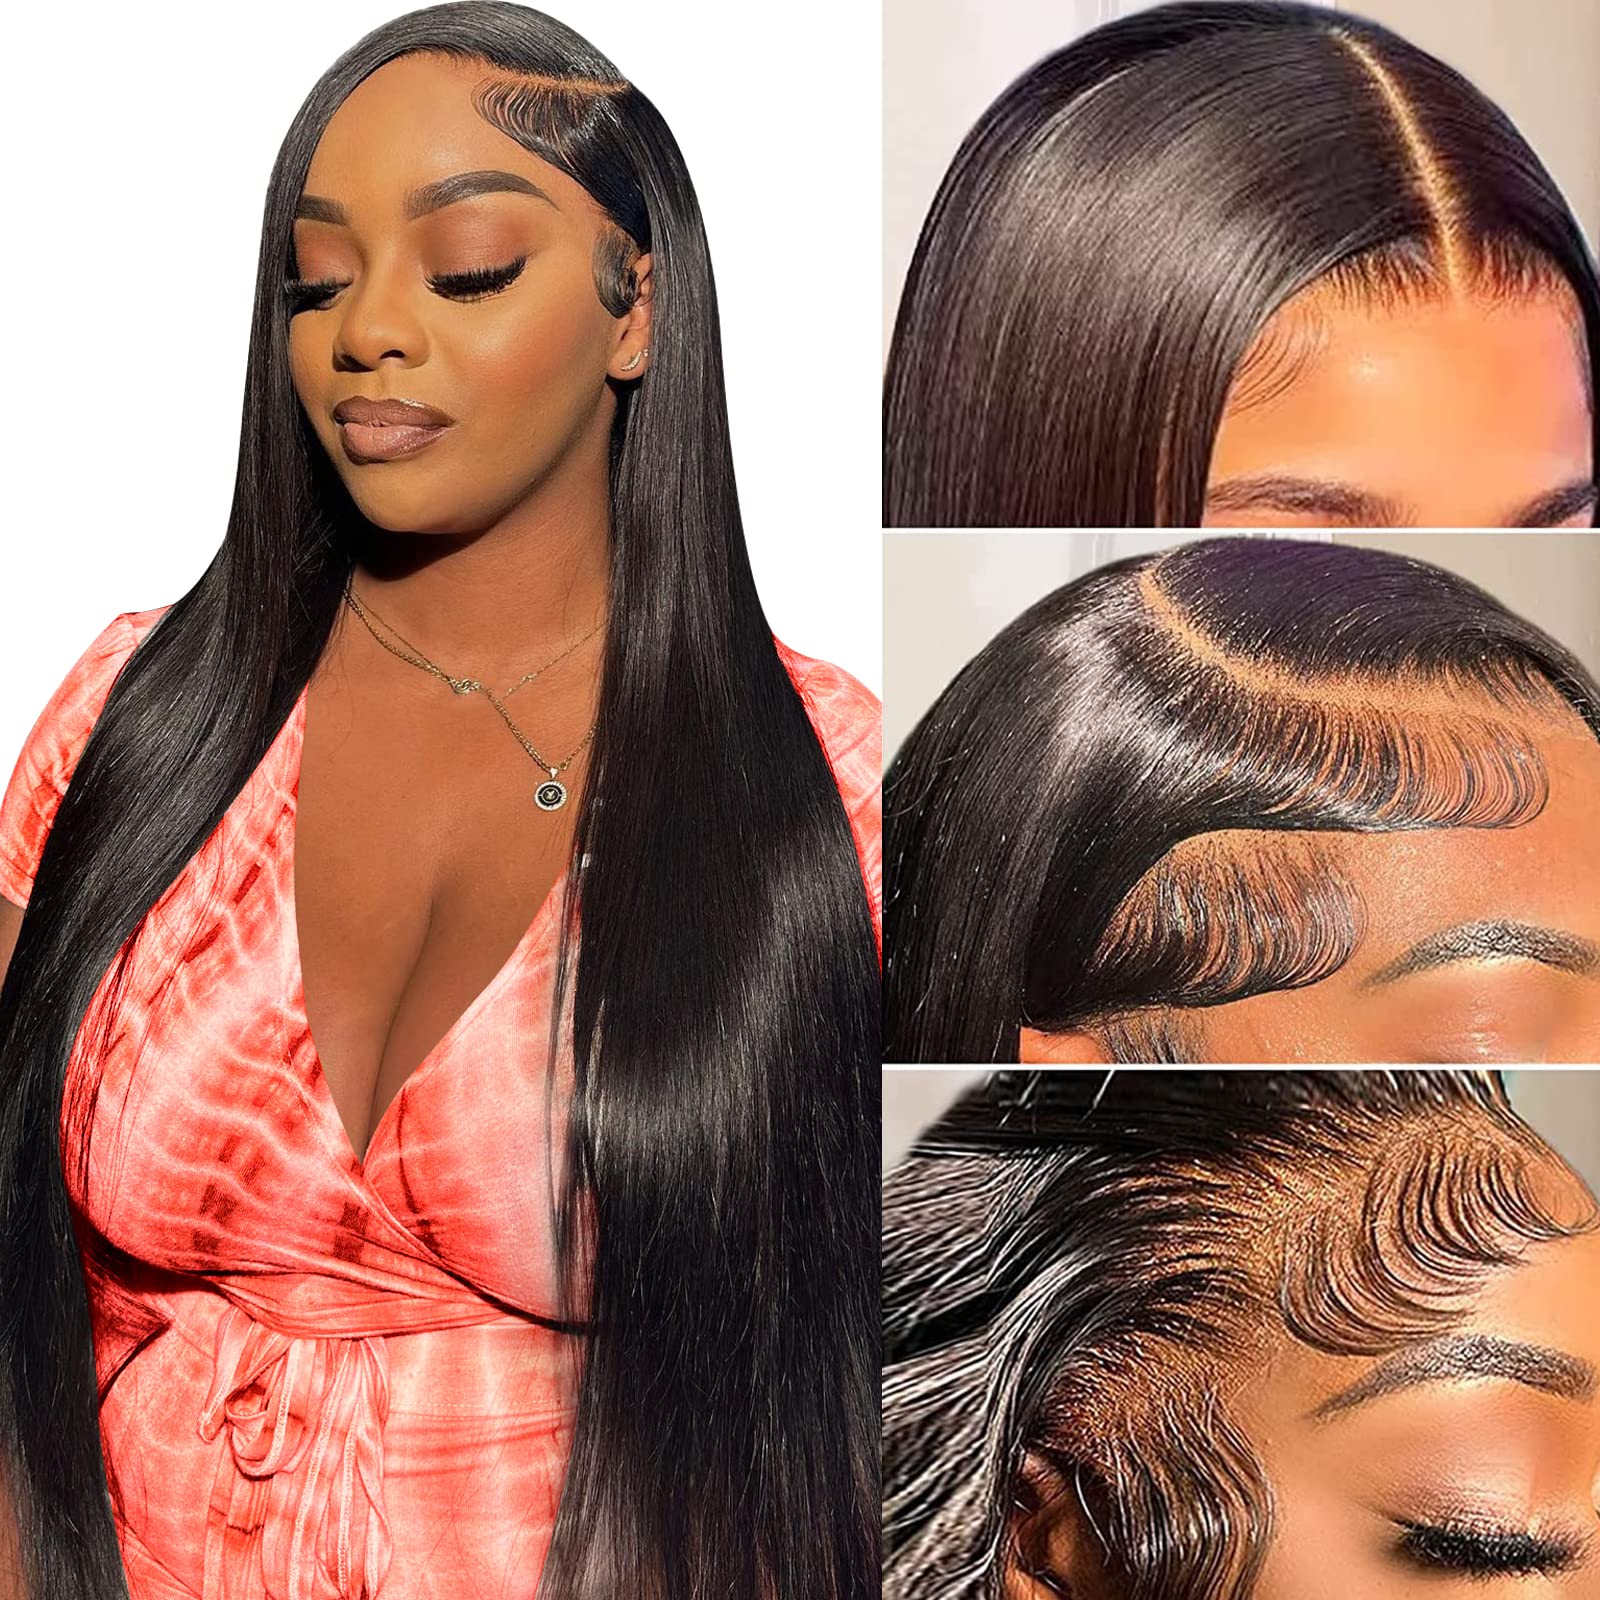  Straight Lace Front Wigs Human Hair Pre Plucked 180